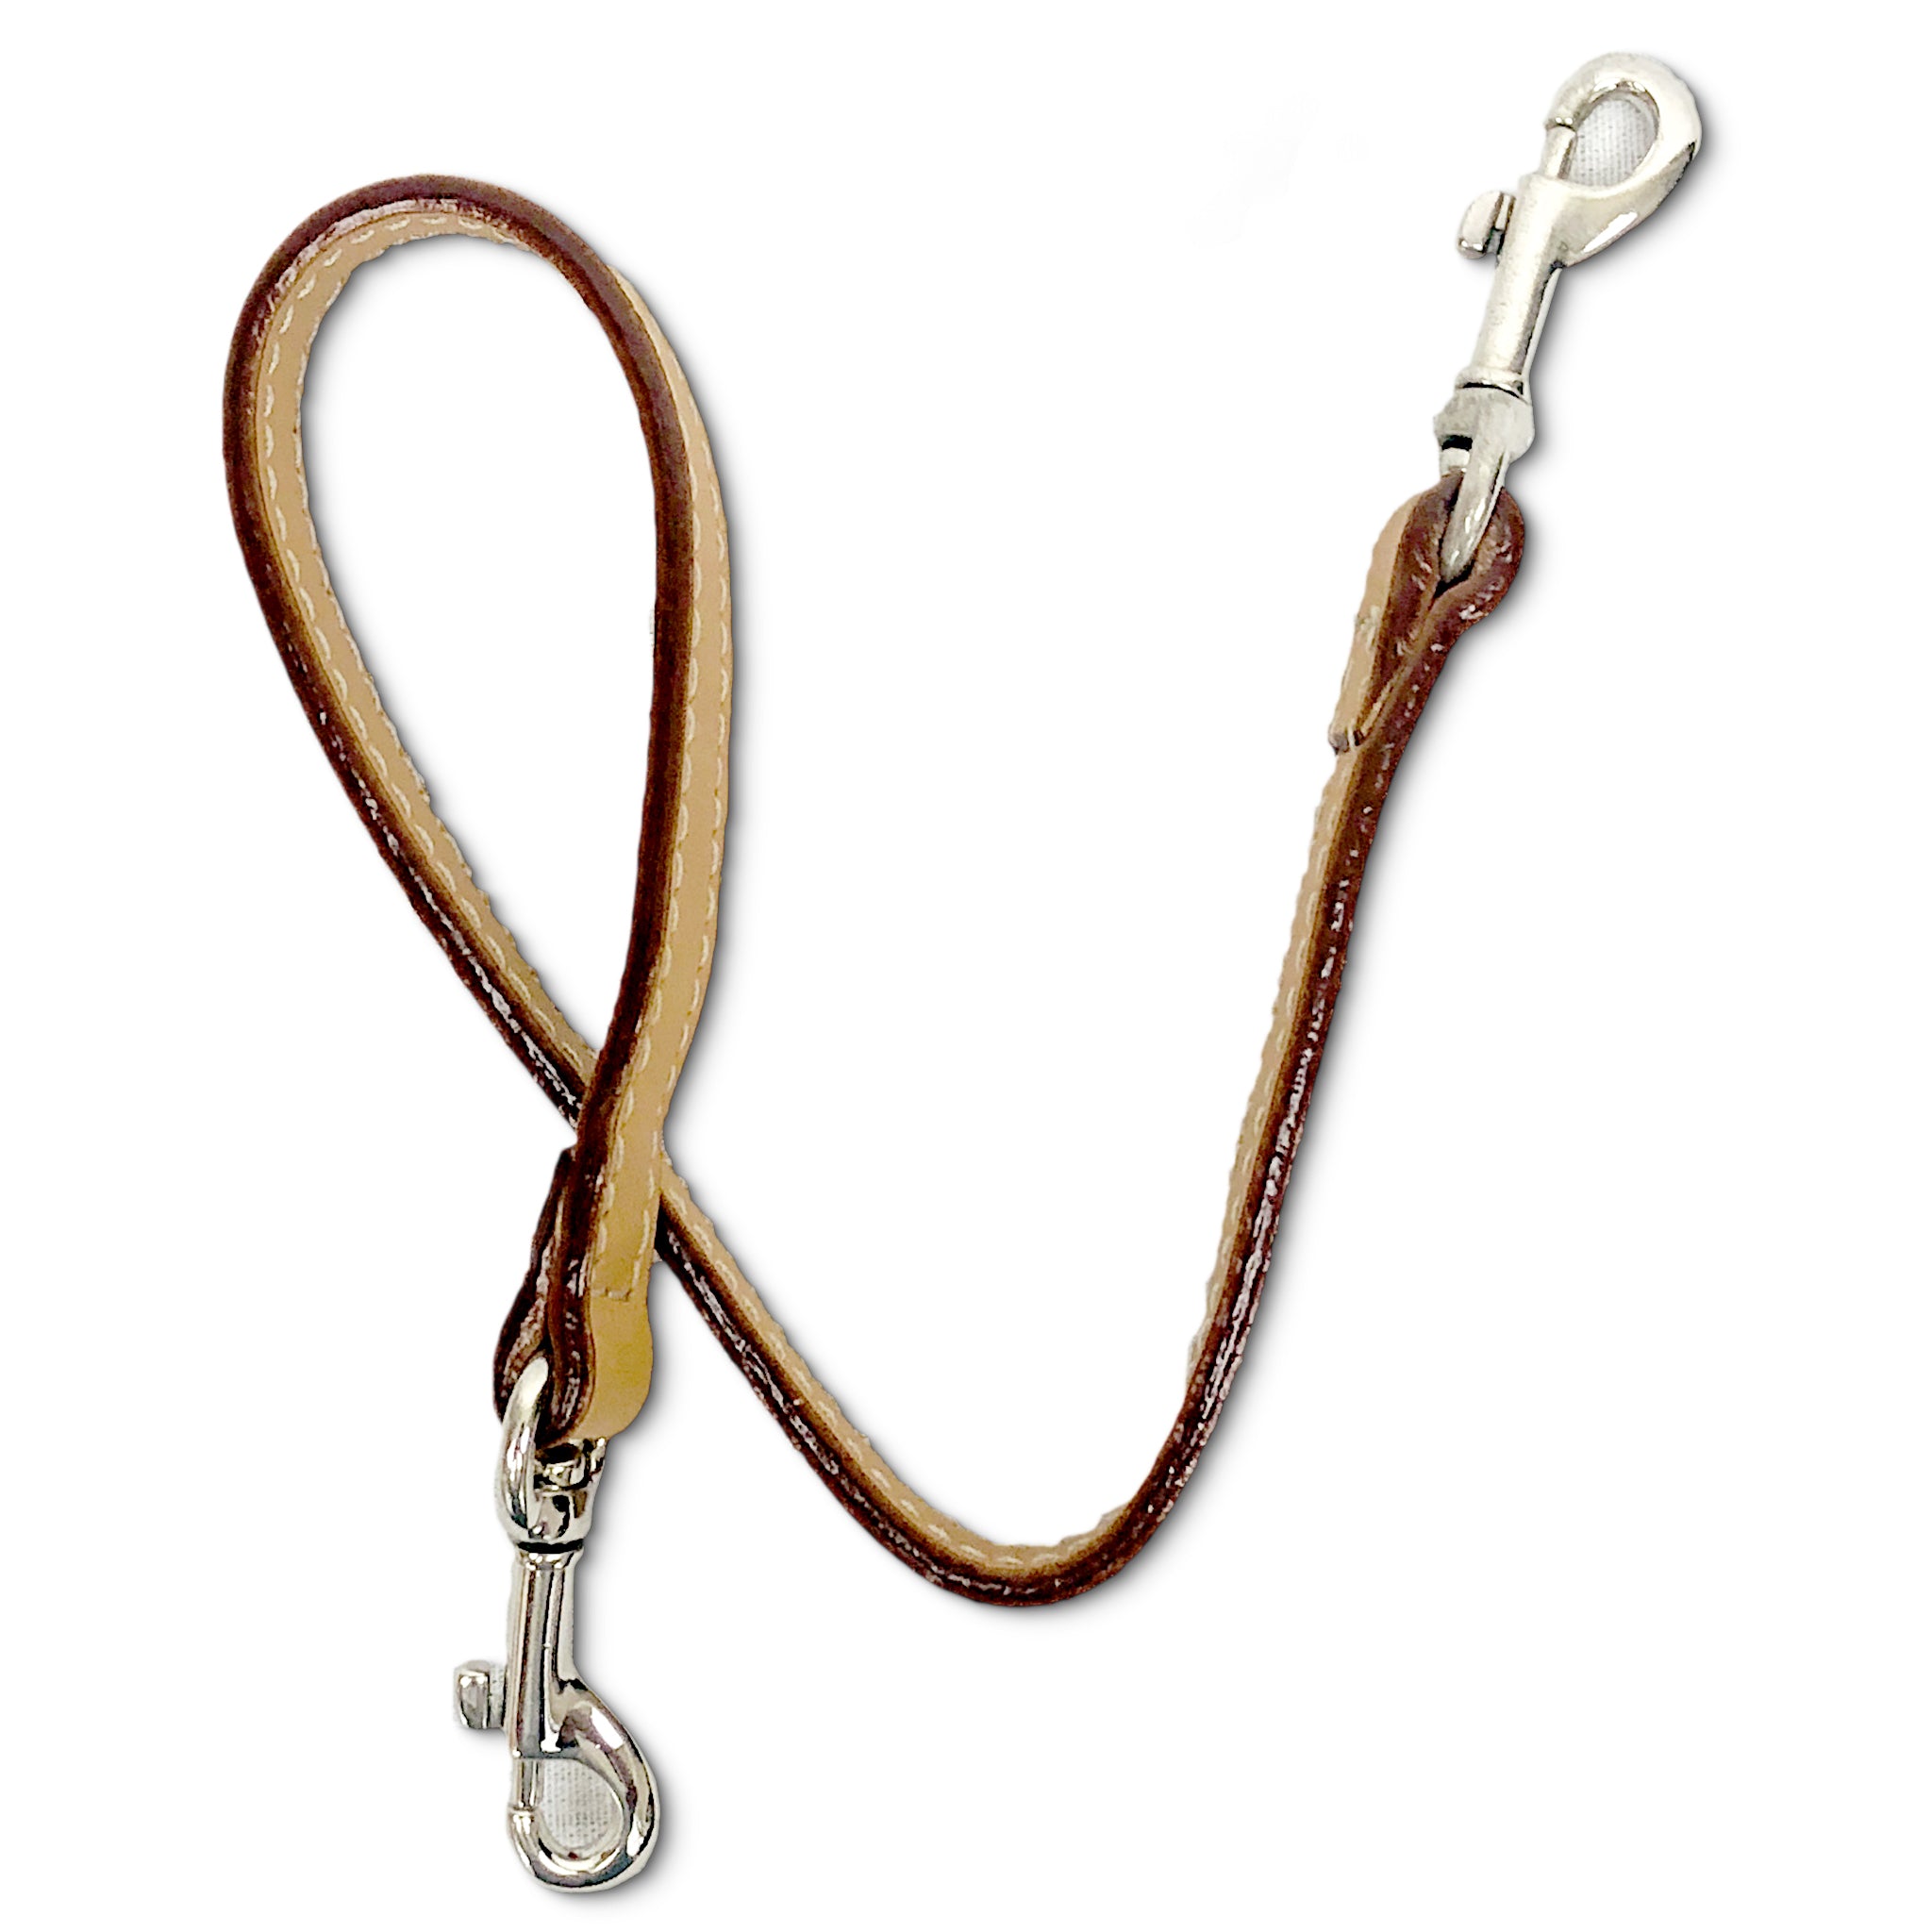 Leather key lanyard in saddle tan on its side to show the edge